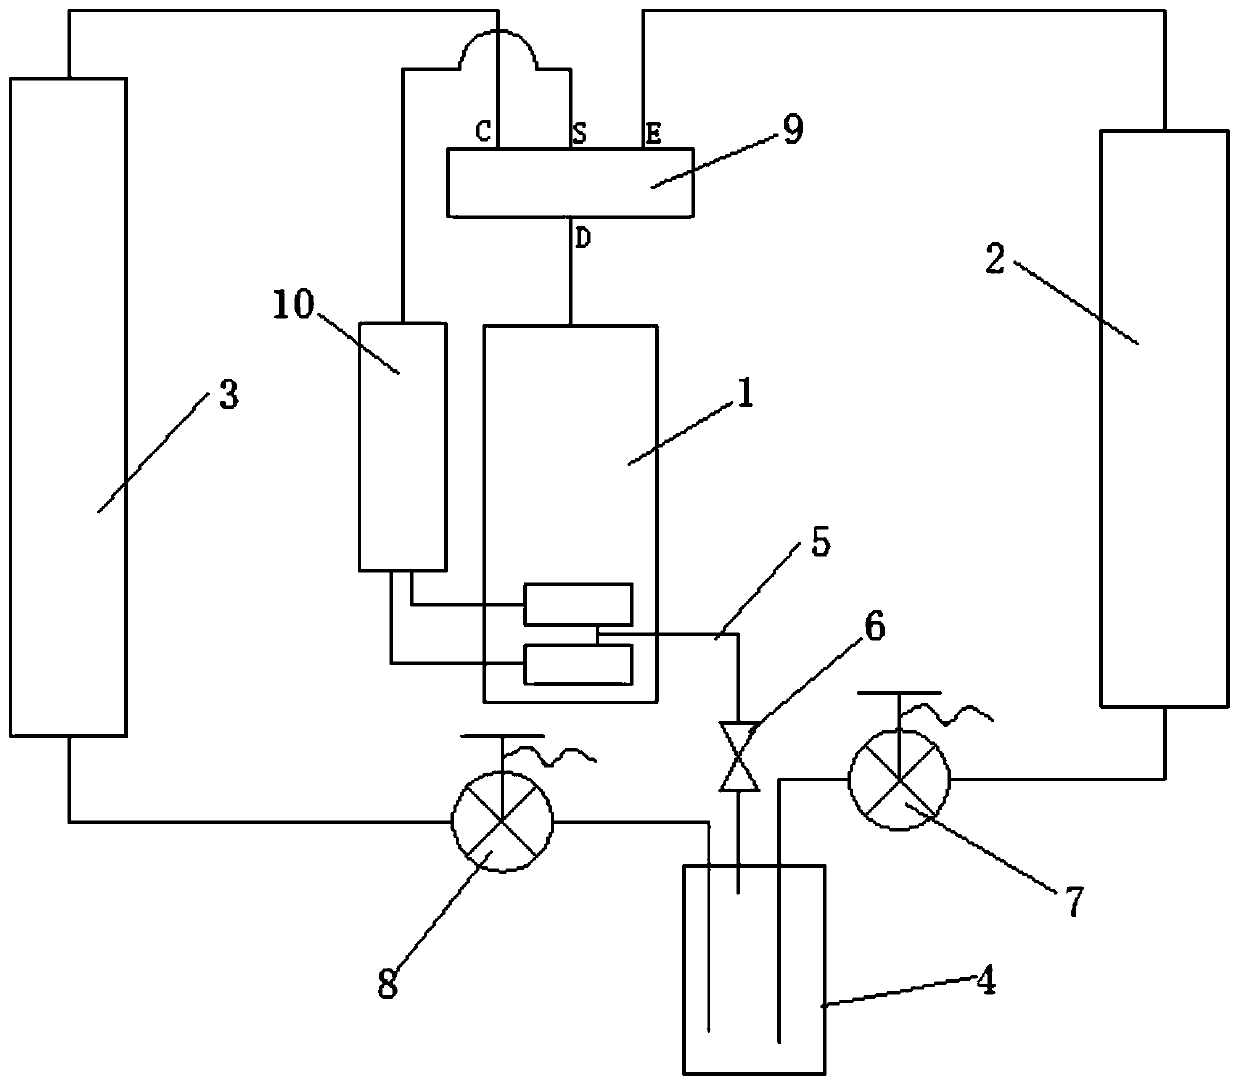 A method for controlling the exhaust temperature of an air conditioner